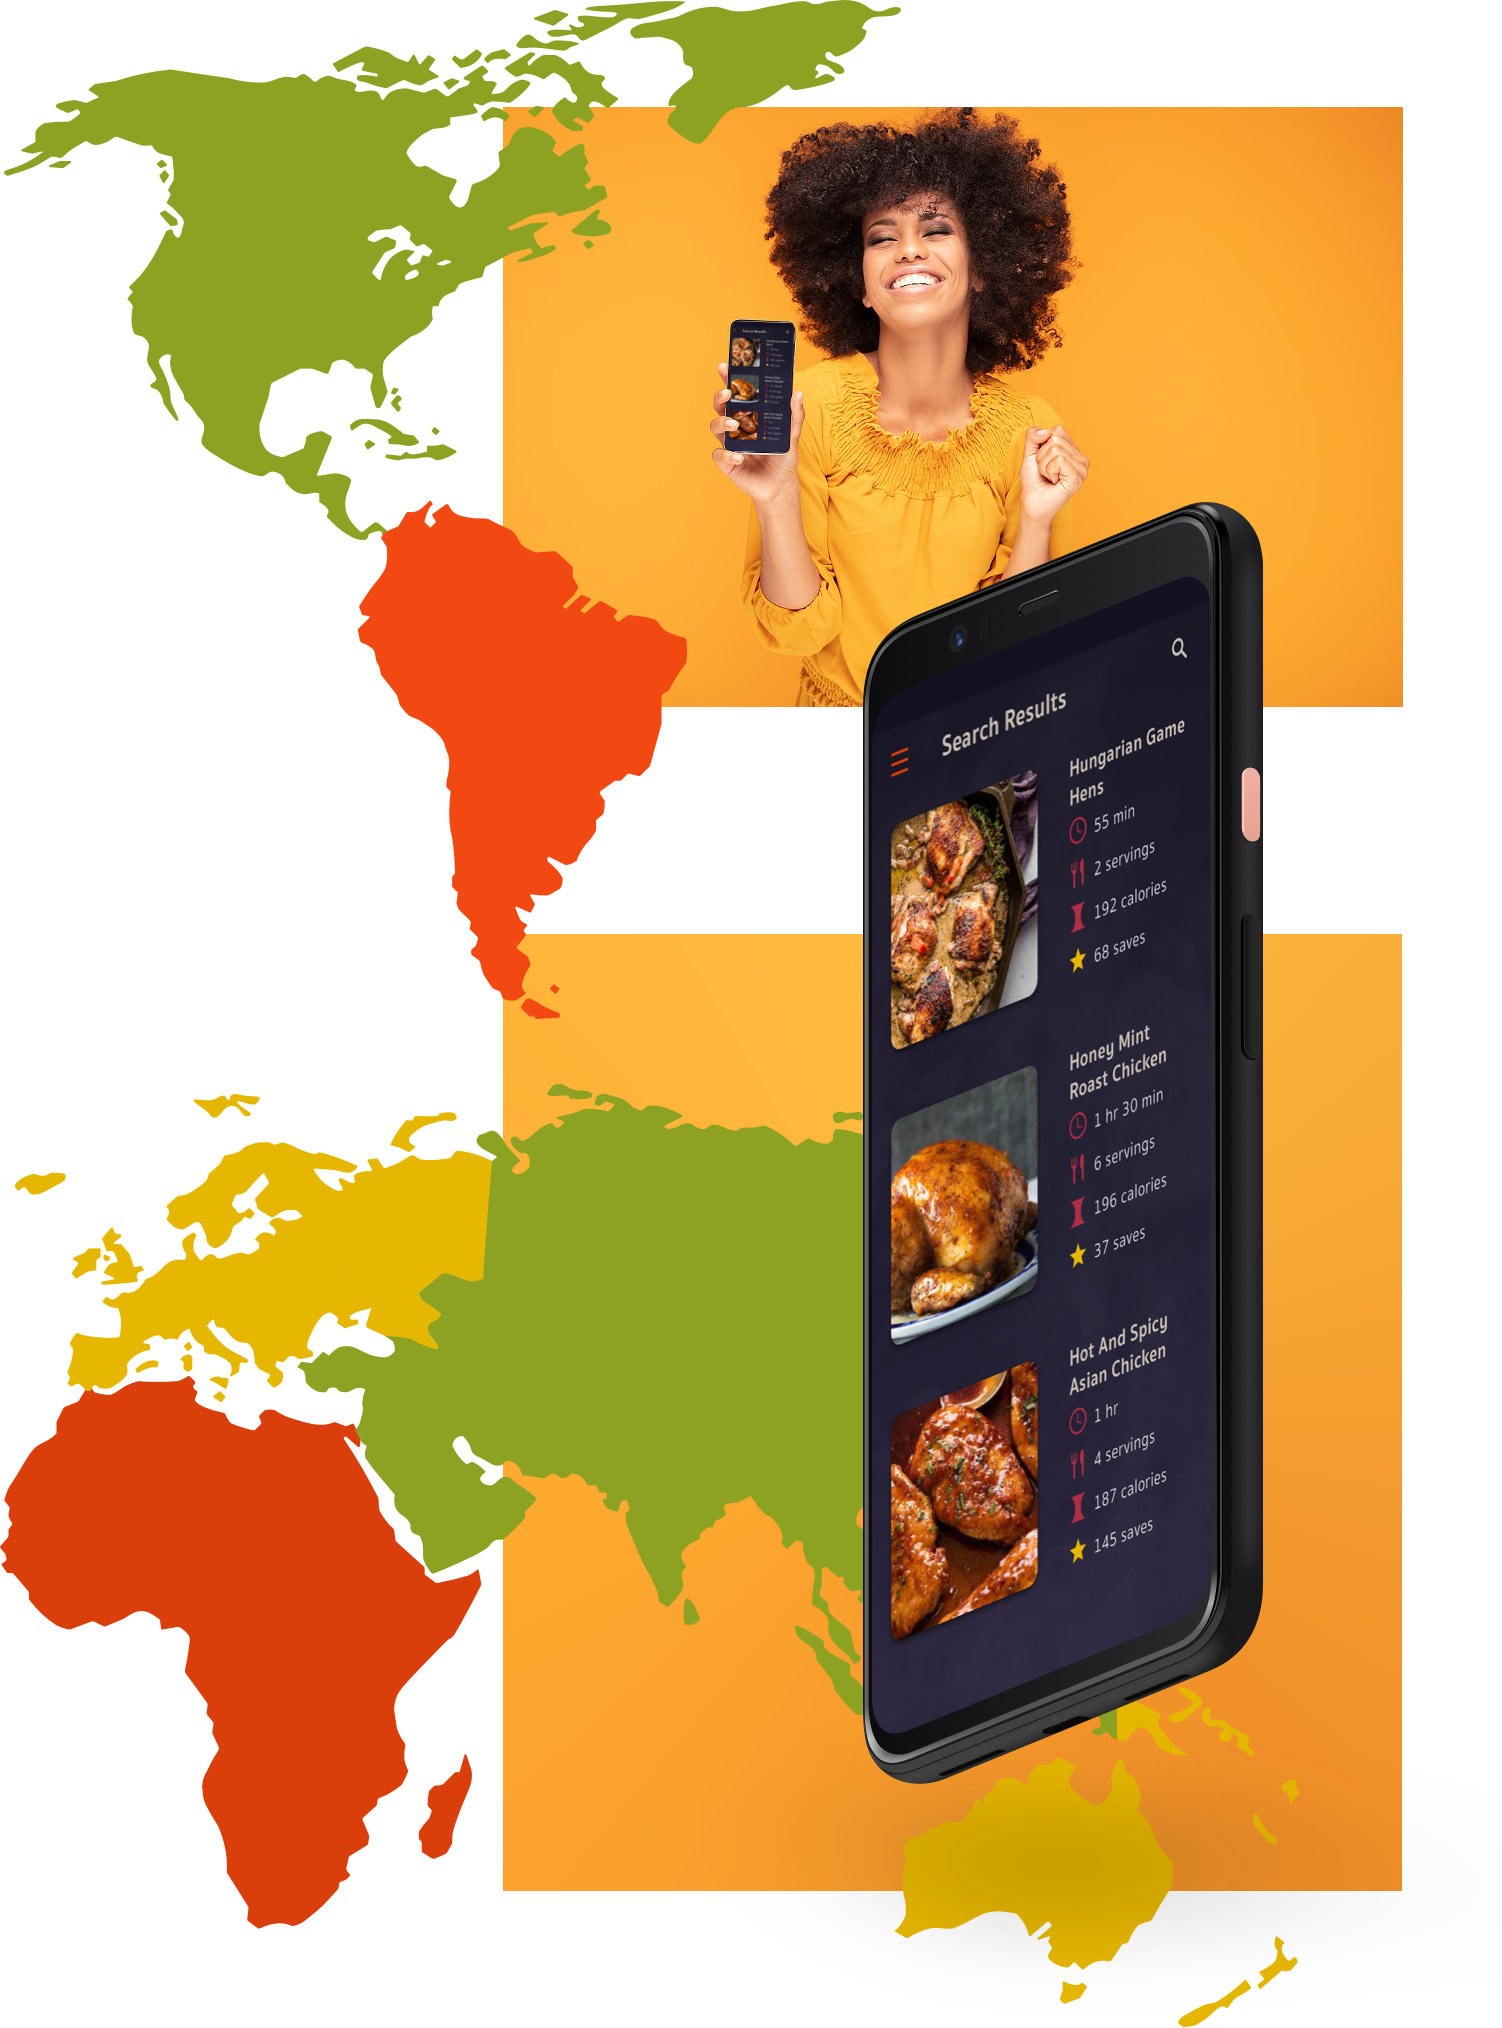 phone displaying search results for chicken, excited woman holding phone, orange backrgound, floating map continents